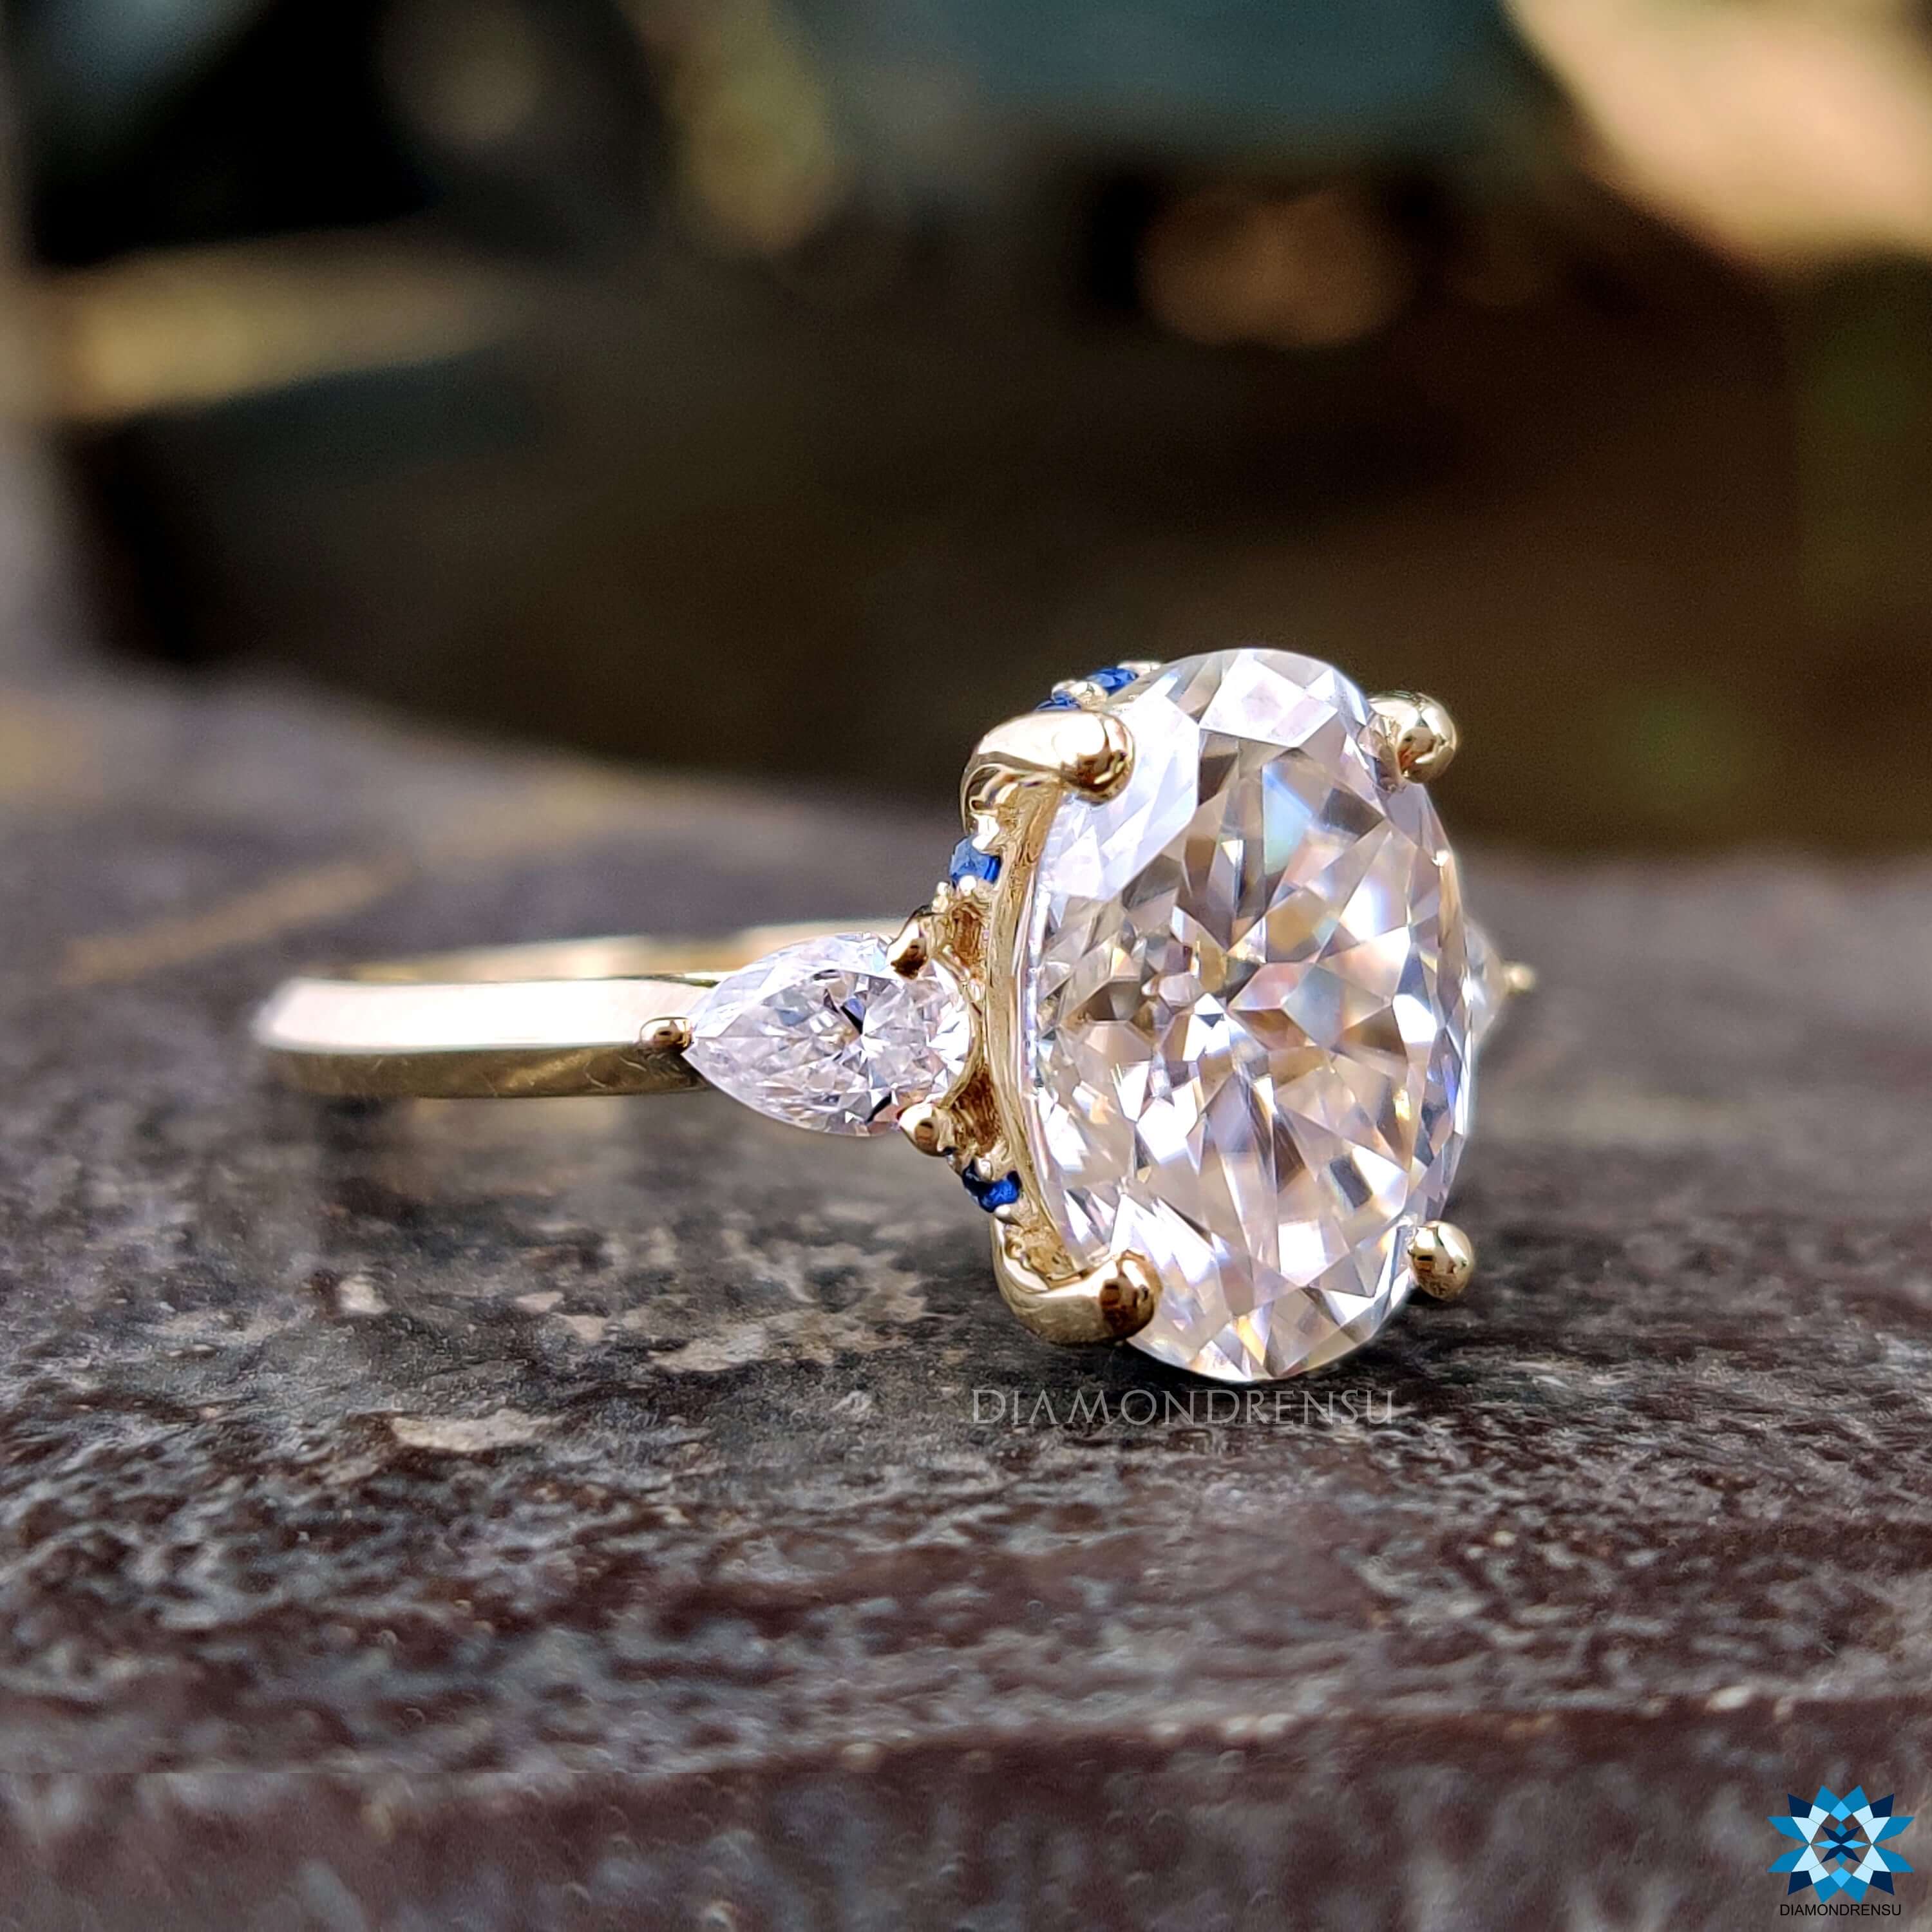 5 alternative stones for an engagement ring